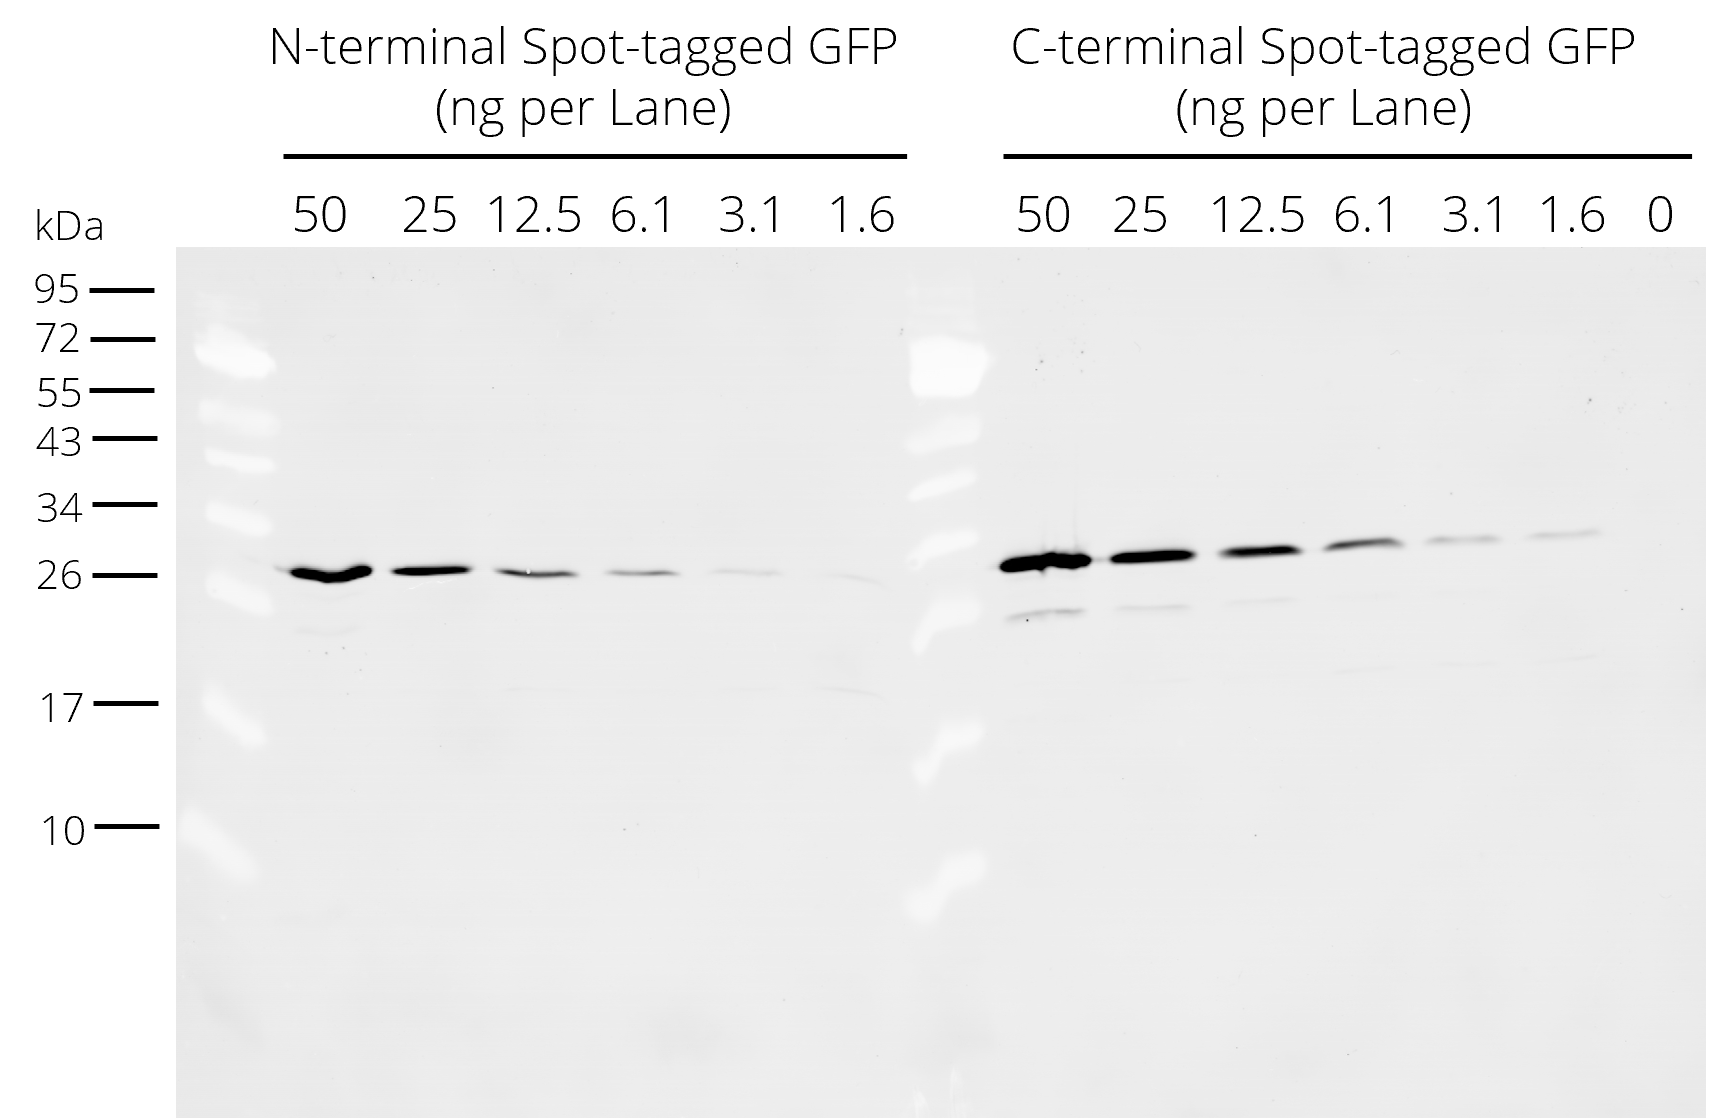 Western blot analysis of N- and C-terminal Spot-tagged GFP added to HEK-293T cell lysate. Detection with Spot-tag® antibody [28A5] (28a5, ChromoTek) 1:5,000 and Nano-Secondary® alpaca anti-mouse IgG1, recombinant VHH, Alexa Fluor® 488 [CTK0103, CTK0104] (sms1AF488-1, ChromoTek) 1:5,000. Western blot membrane was incubated simultaneously with the primary antibody and Nano-Secondary® (one-step staining).